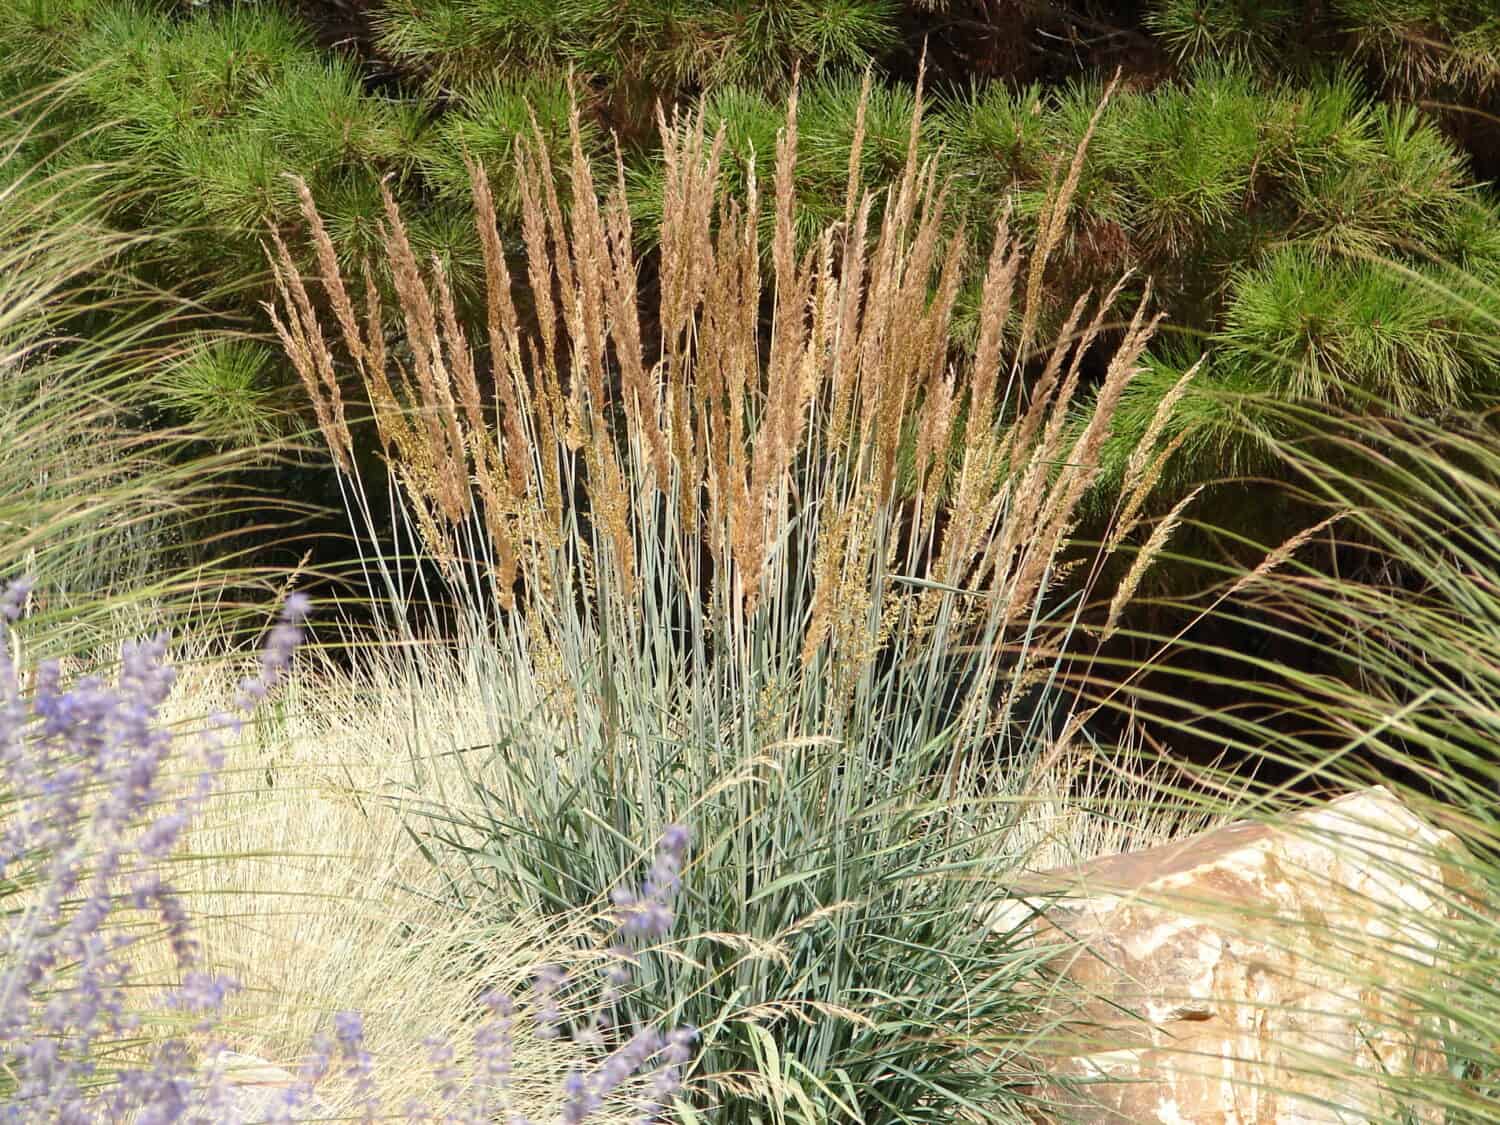 Indian Grass - Sorghastrum nutans - Ornamental Grass, Native Grass. Perfect for cold environmets down to zone 4. 